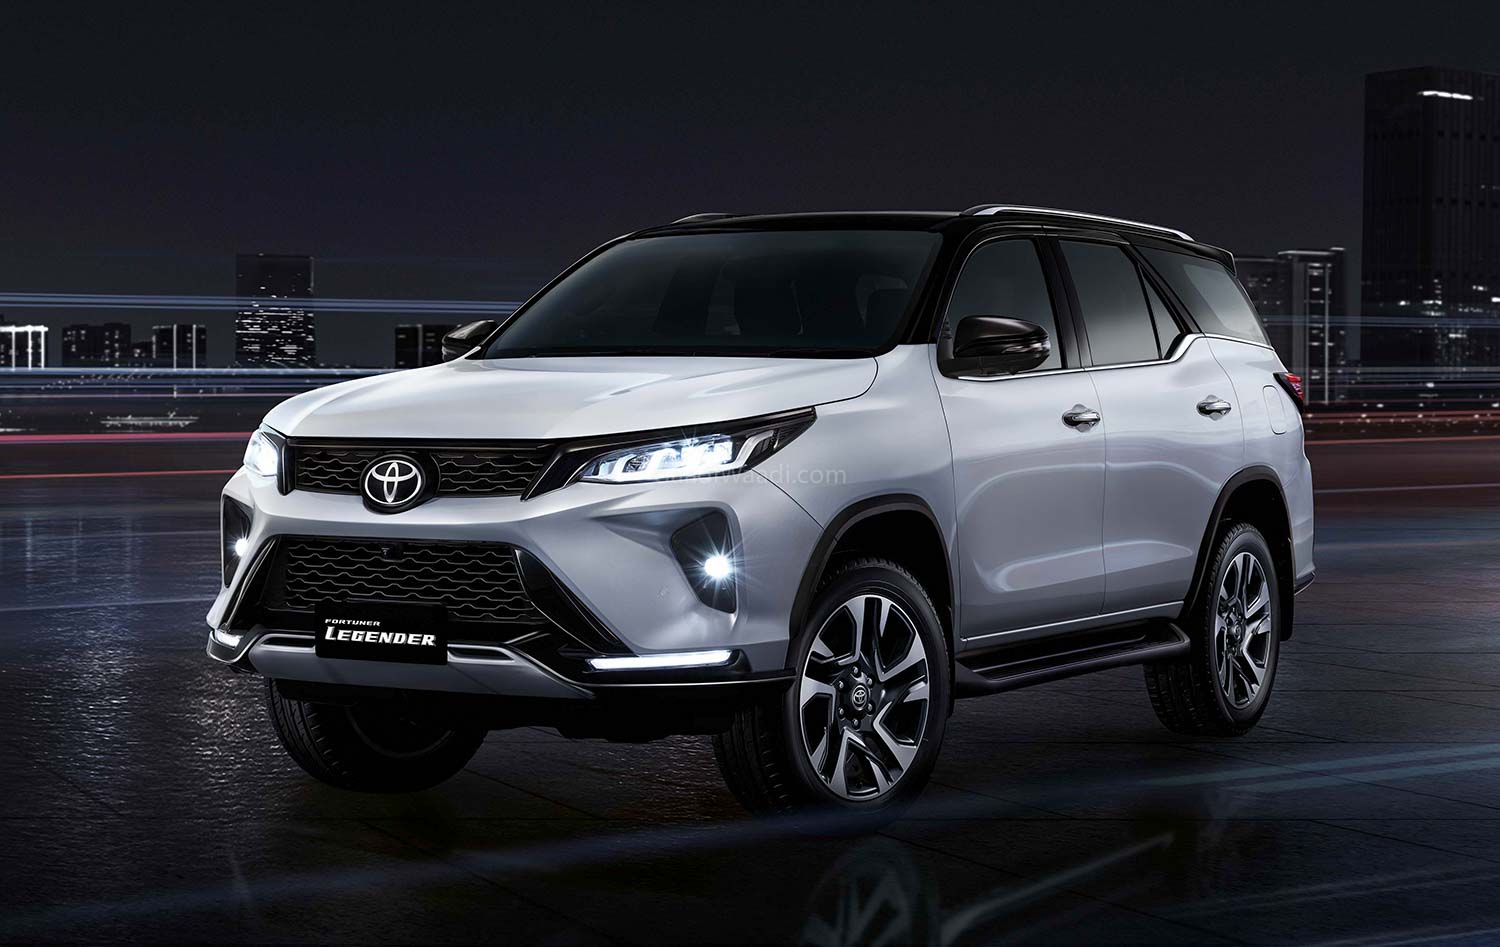 2021 Toyota Fortuner Facelift Revealed With More Power & Updated Design